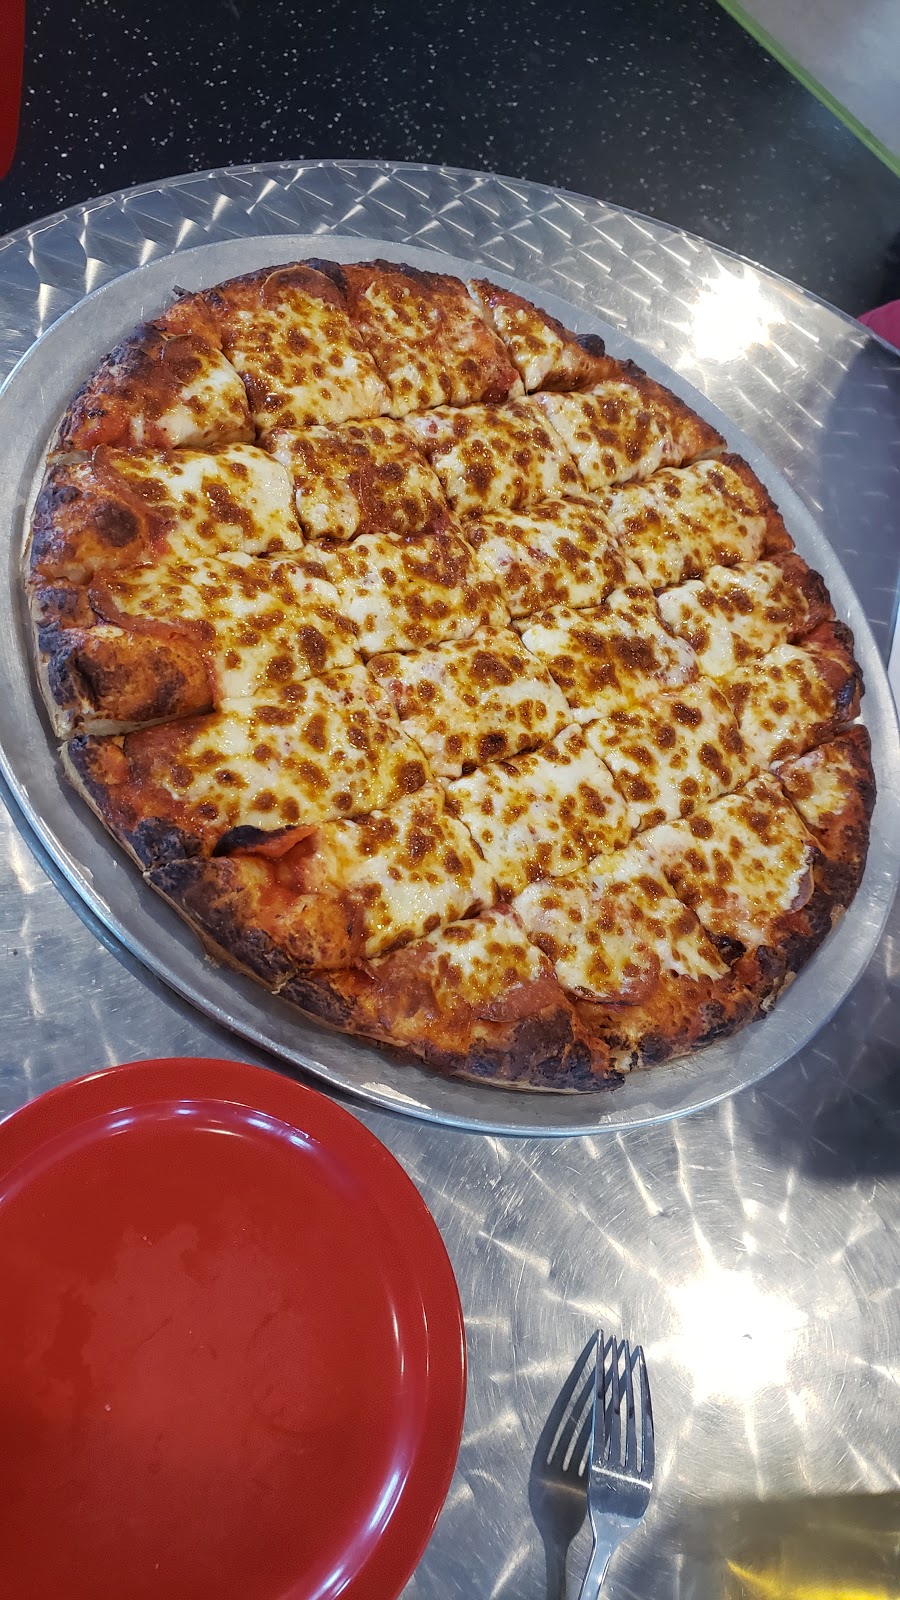 Fat Cat Pizza | 1448 Ety Rd NW, Lancaster, OH 43130 | Phone: (740) 652-1111